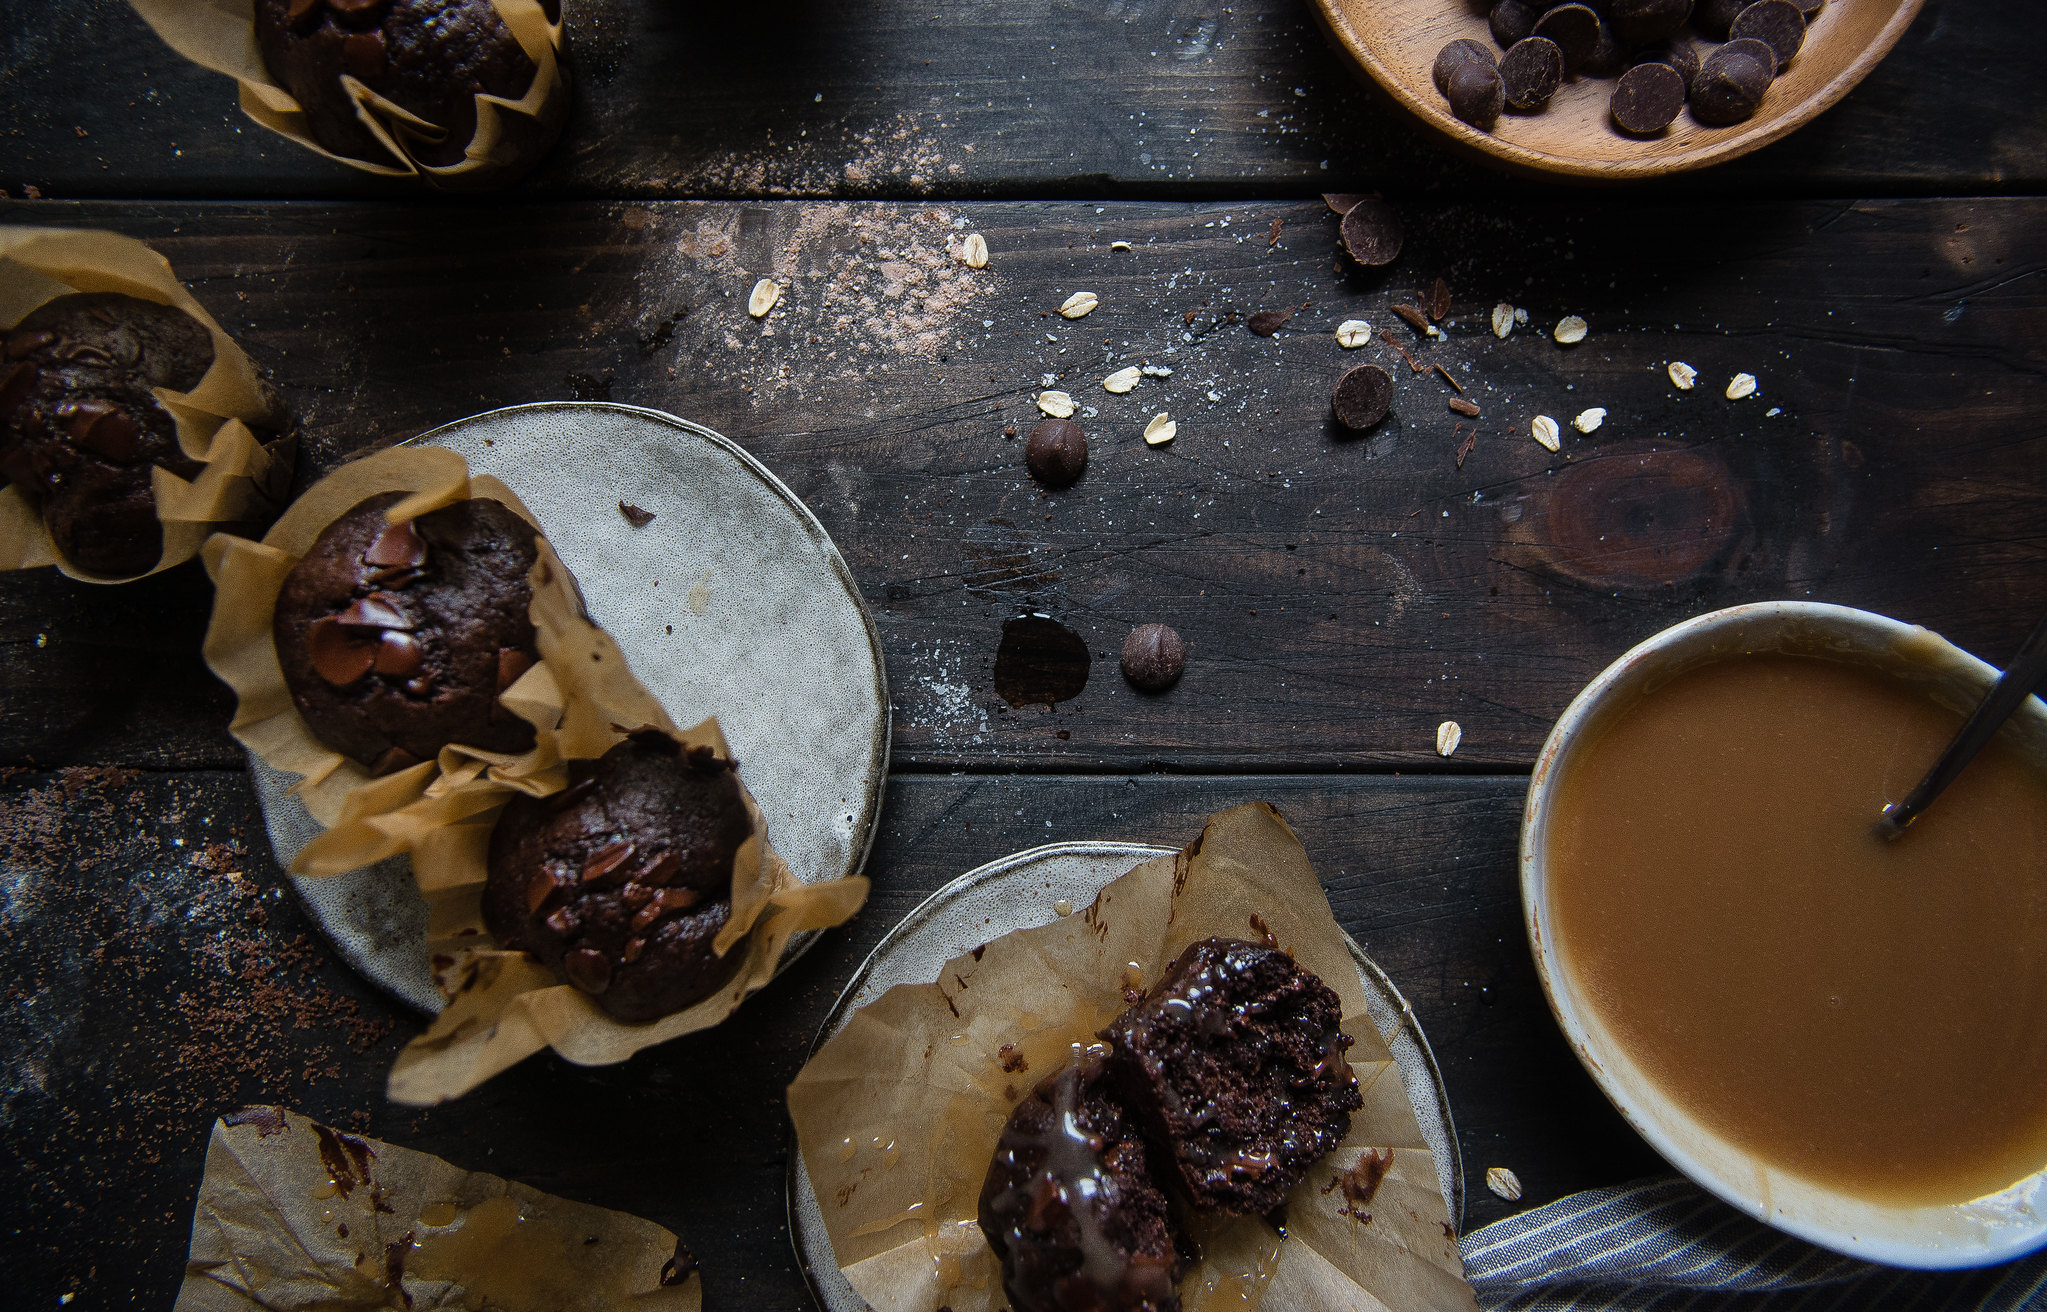 double chocolate muffins with salted caramel sauce, from the top with cinnamon cookbook